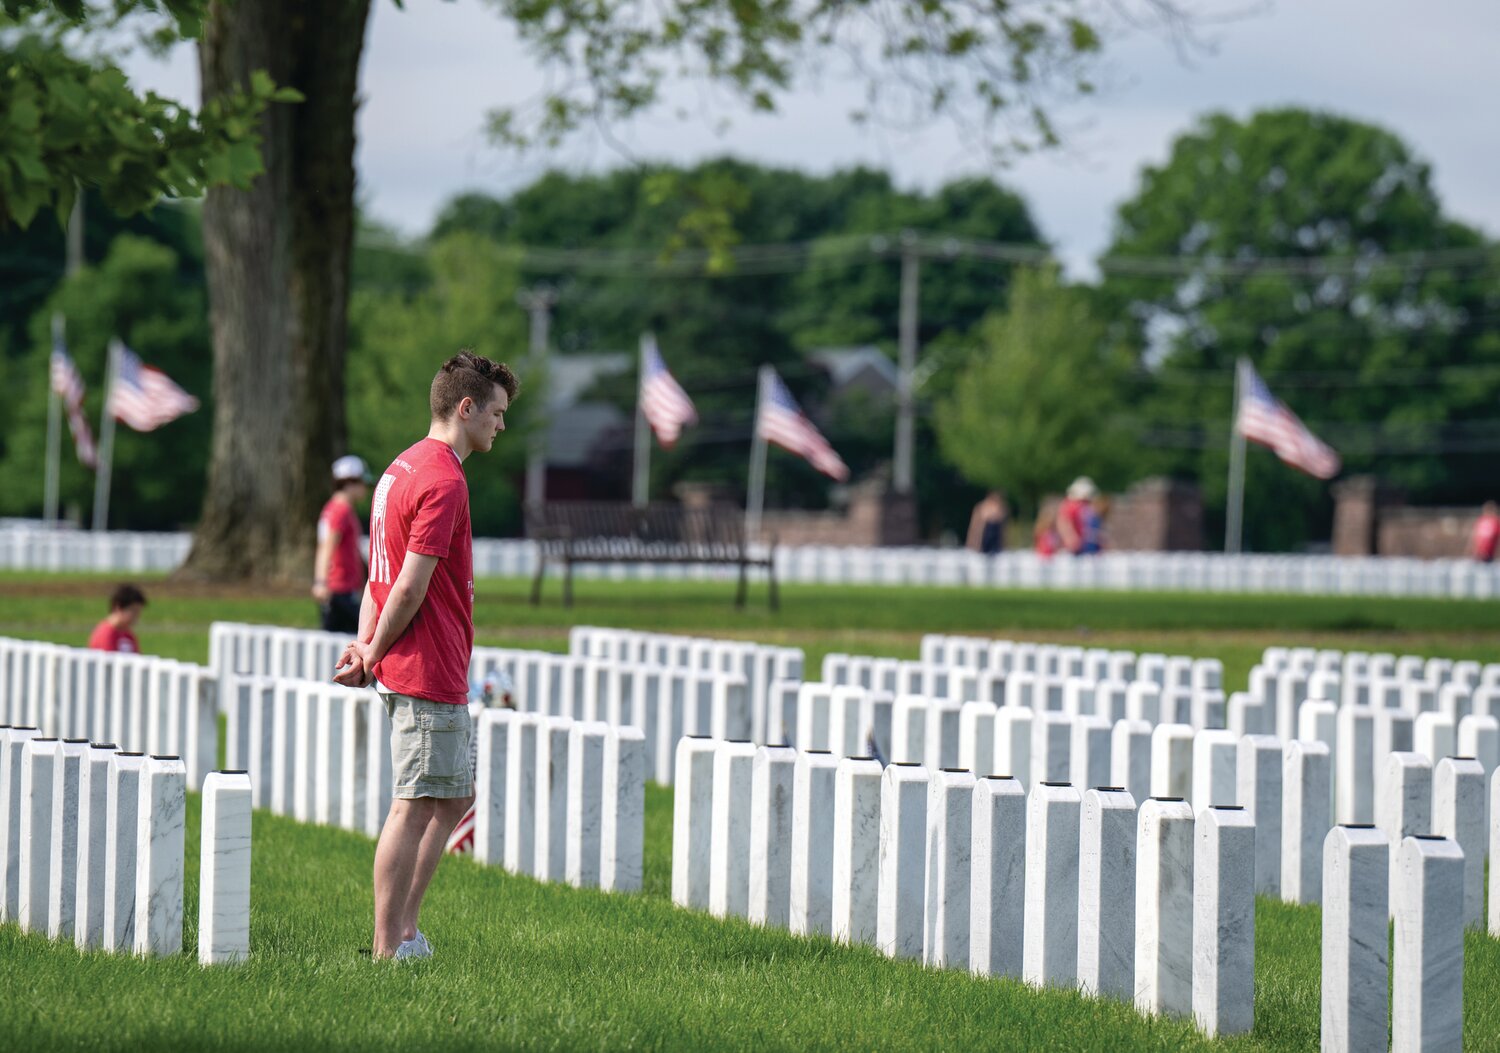 A volunteer who participated in The Honor Project pays his respect to service members buried at Washington Crossing National Cemetery.